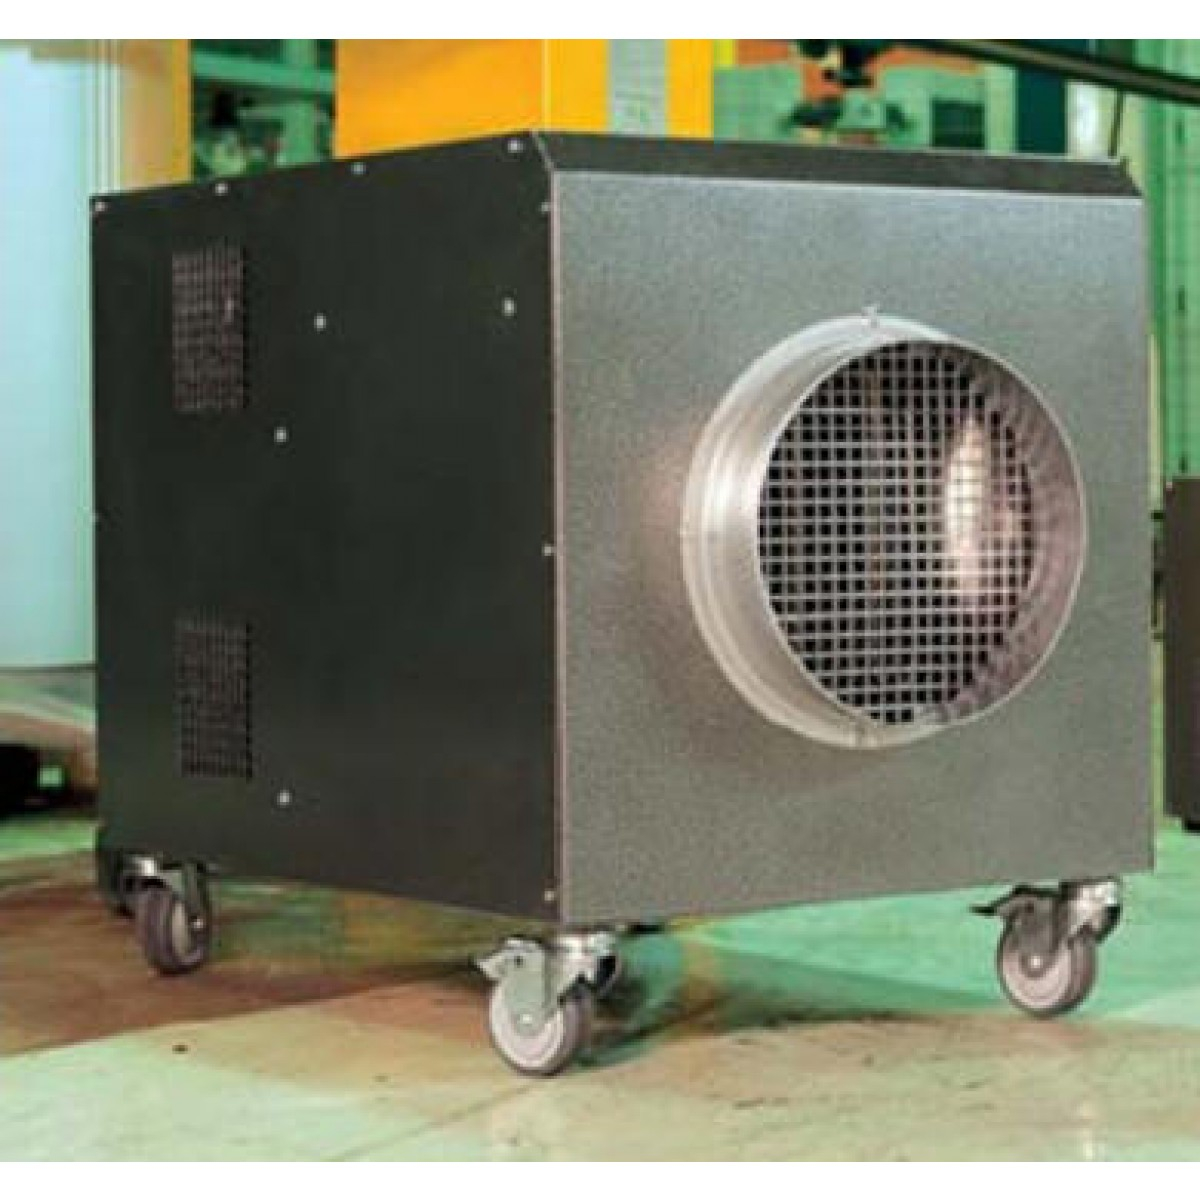 Rhino Fh18 400v 3 Phase 18kw Portable Industrial Fan Heater intended for measurements 1200 X 1200